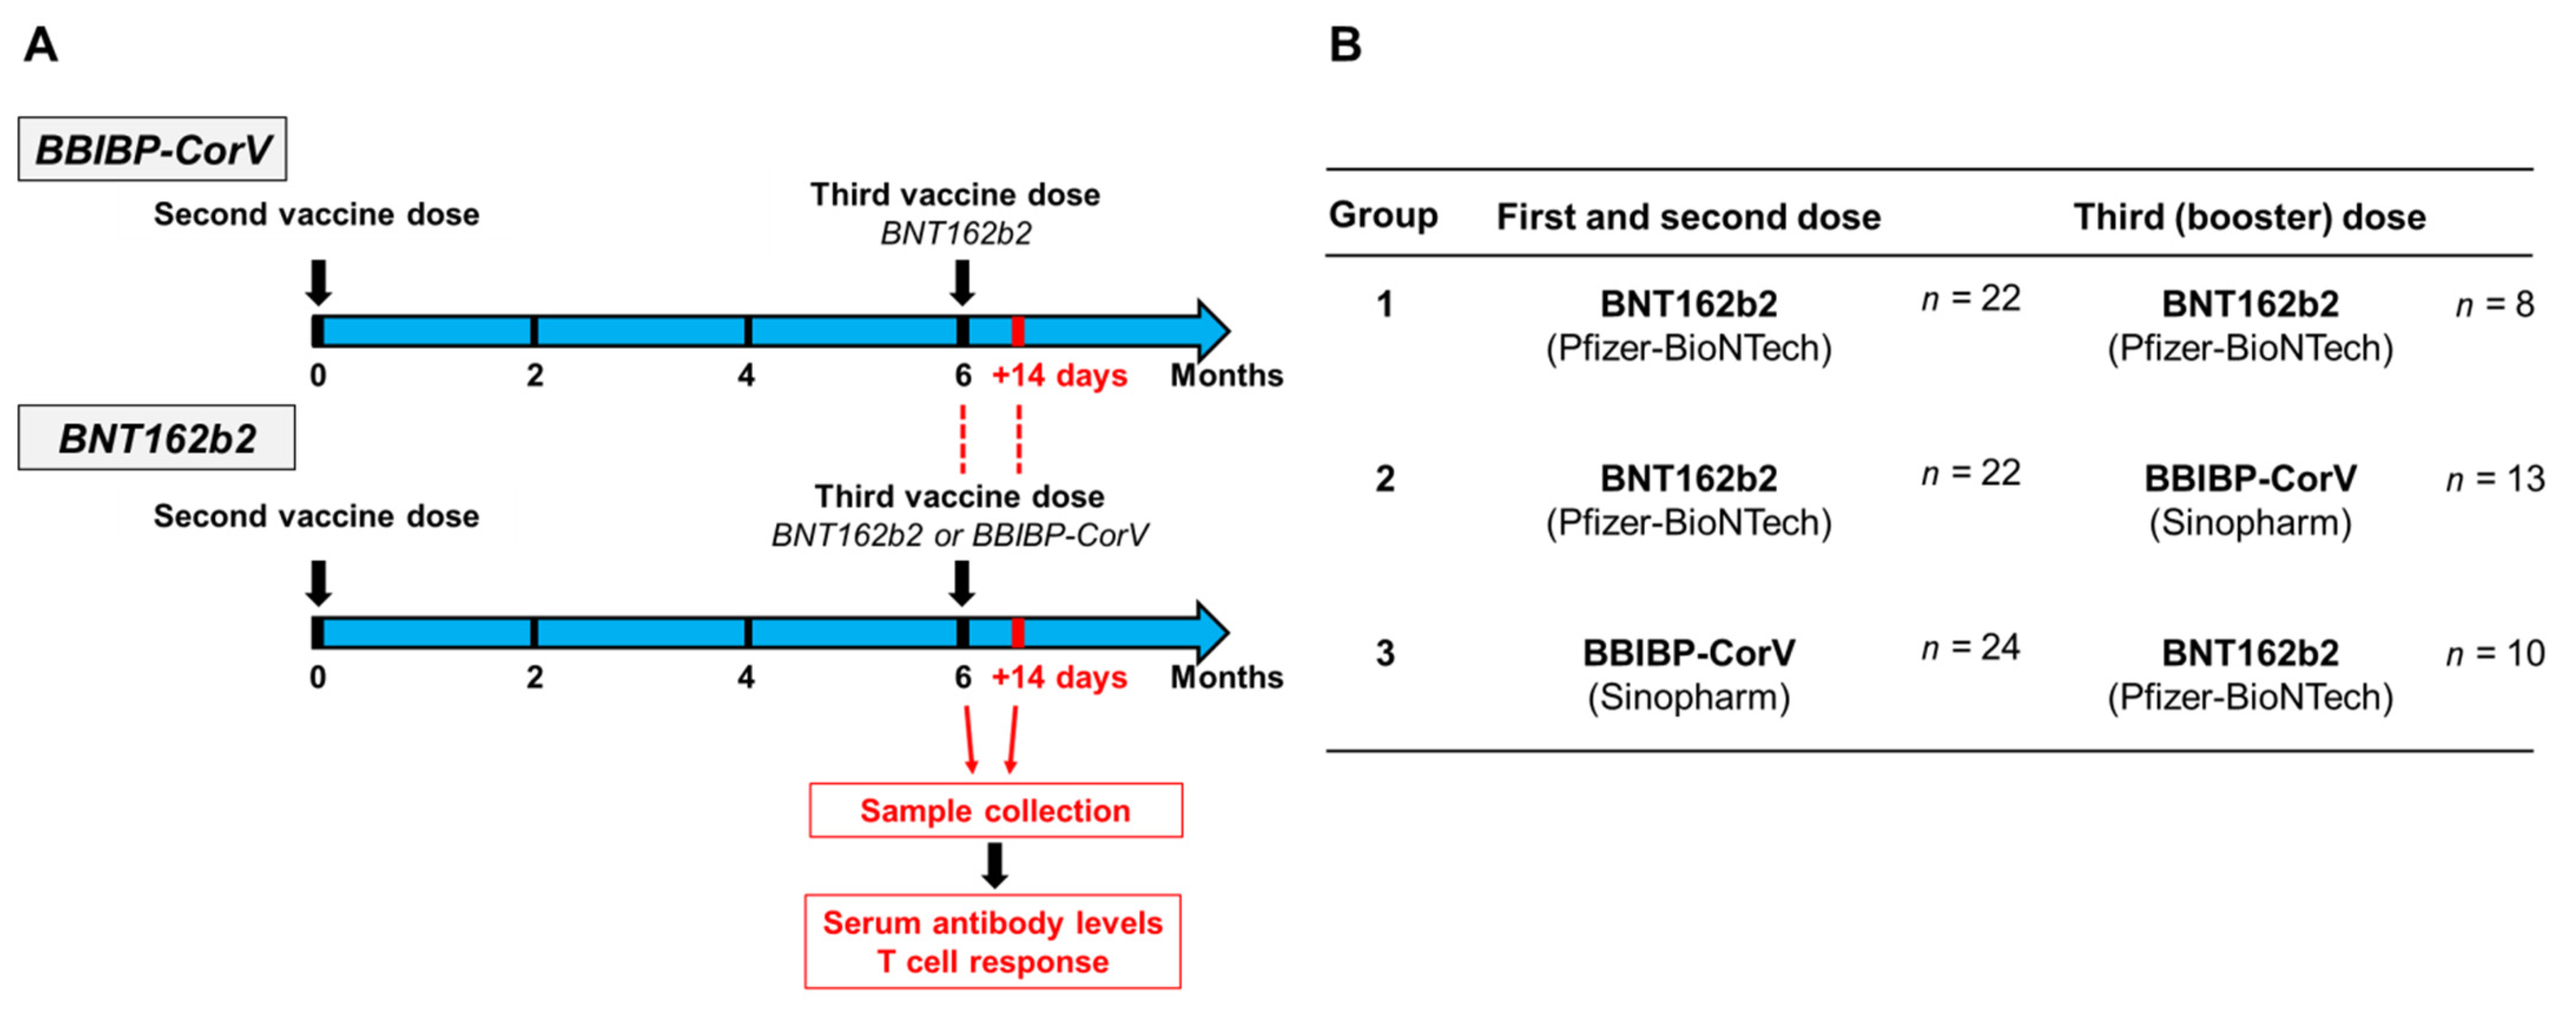 Vaccines | Free Full-Text | Antibody and T Cell Responses against  SARS-CoV-2 Elicited by the Third Dose of BBIBP-CorV (Sinopharm) and  BNT162b2 (Pfizer-BioNTech) Vaccines Using a Homologous or Heterologous  Booster Vaccination Strategy